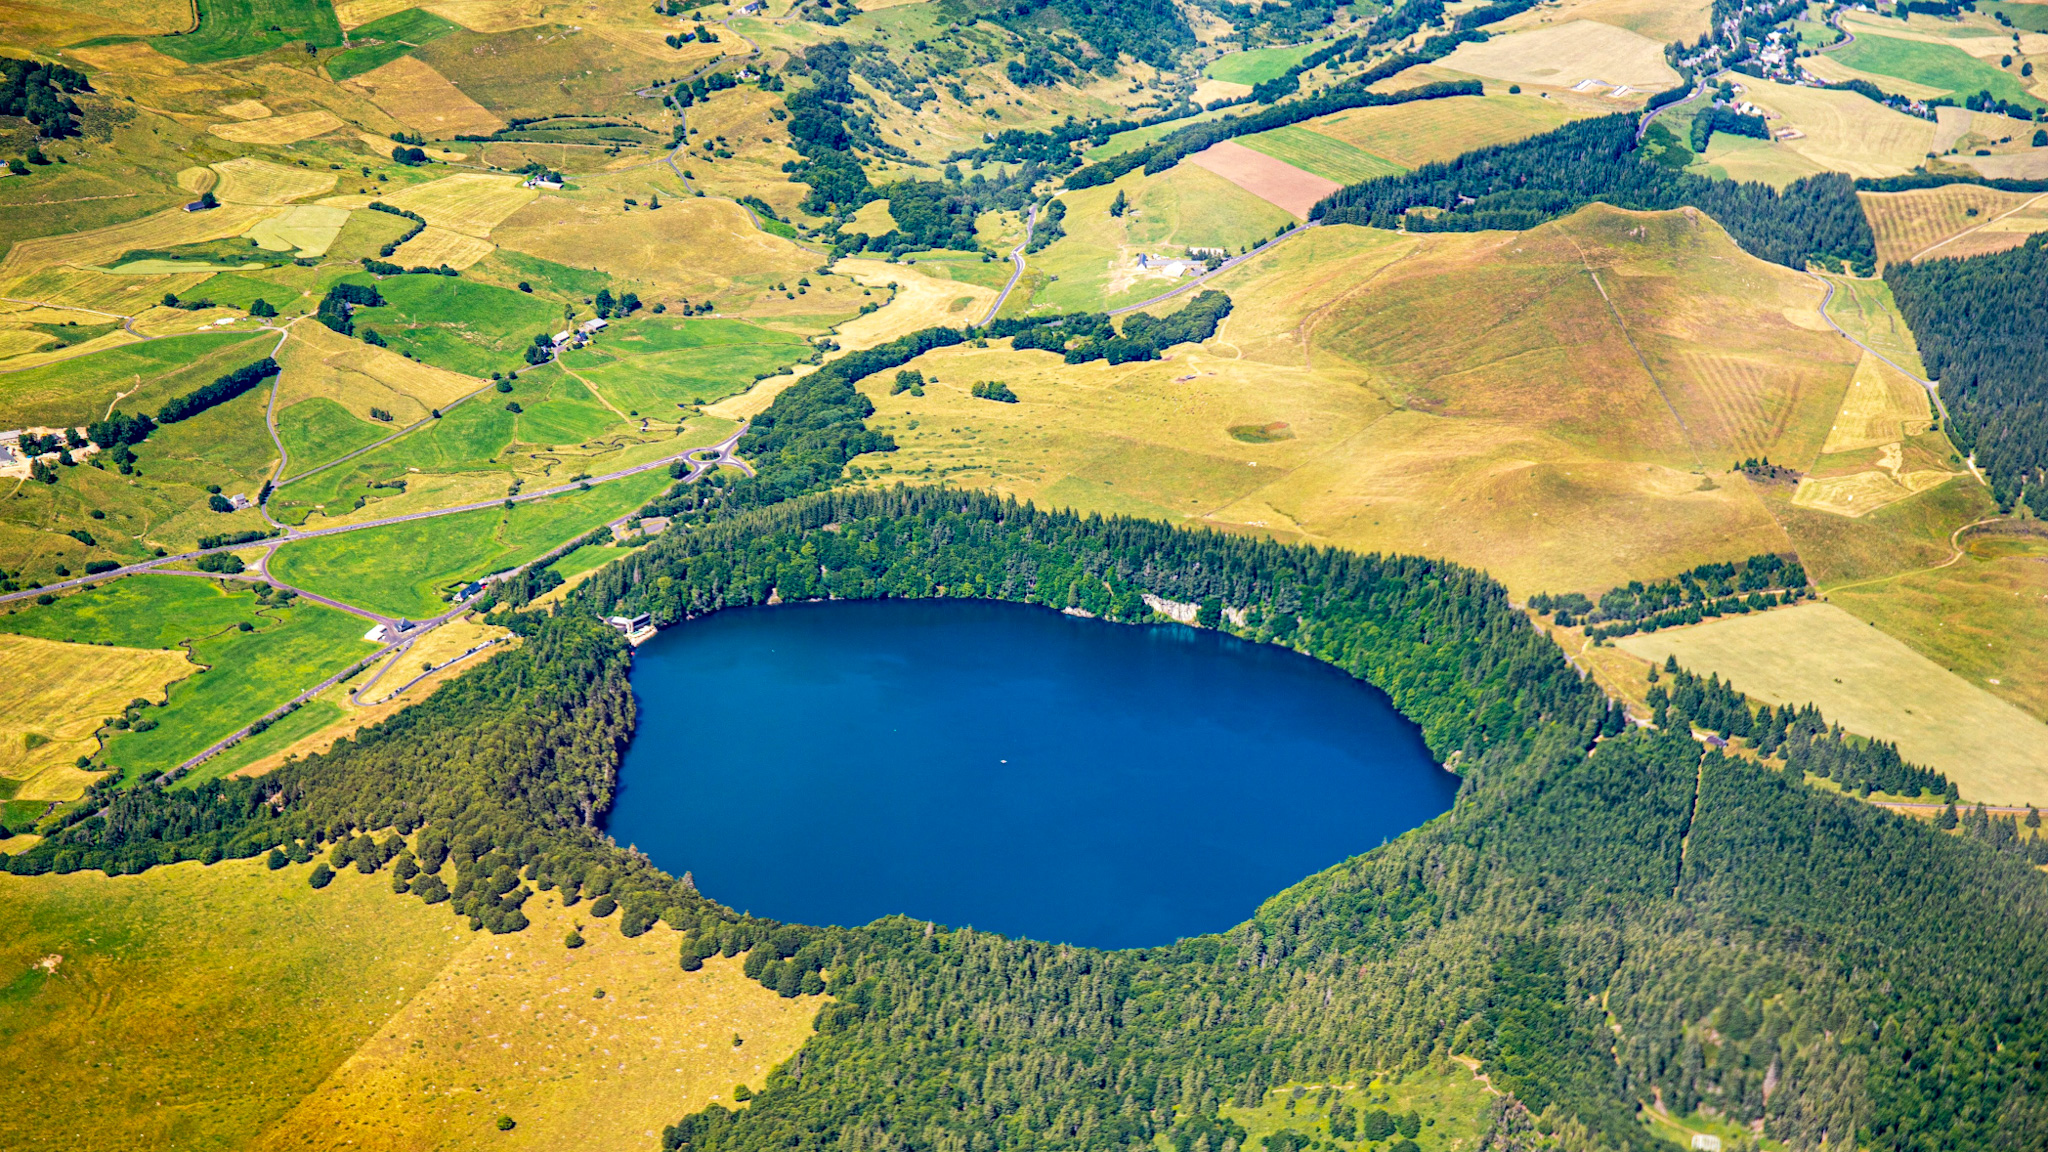 Massif du Sancy, Lac Pavin, the youngest volcano in the Monts Dore